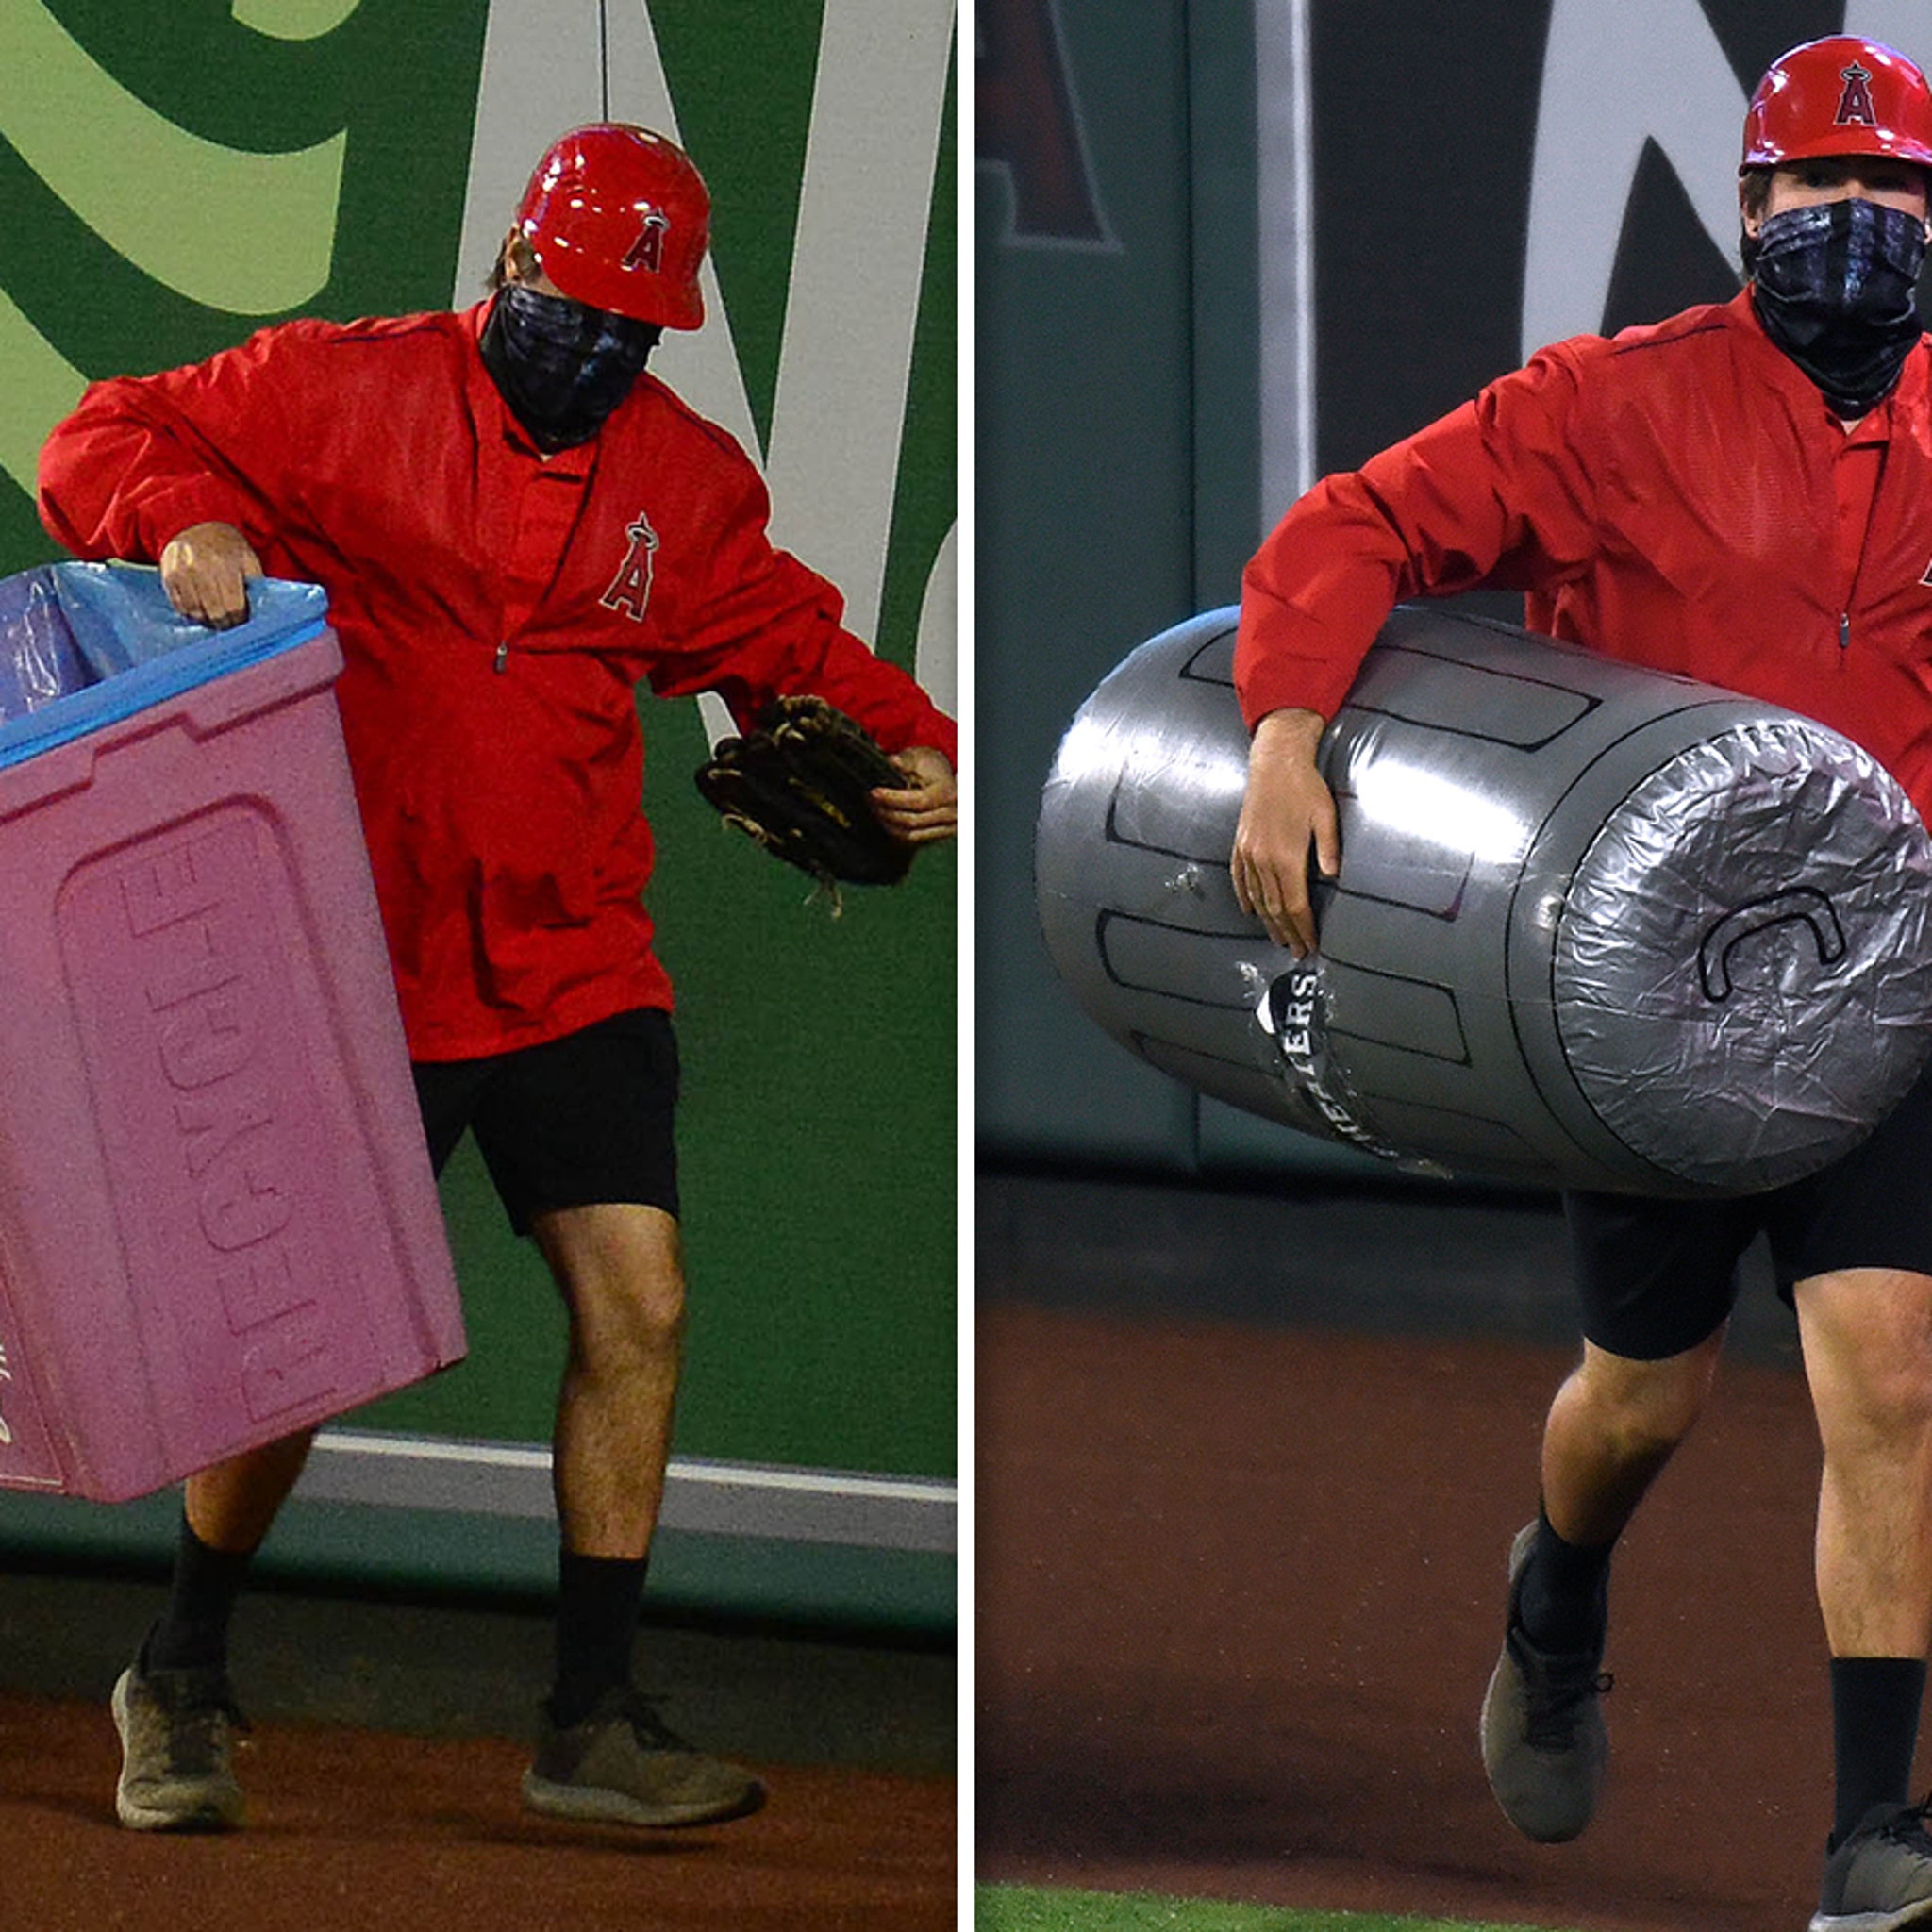 Angels Fans Troll Astros With Barrage Of Trash Cans & 'Astros Suck' Chants  At Game